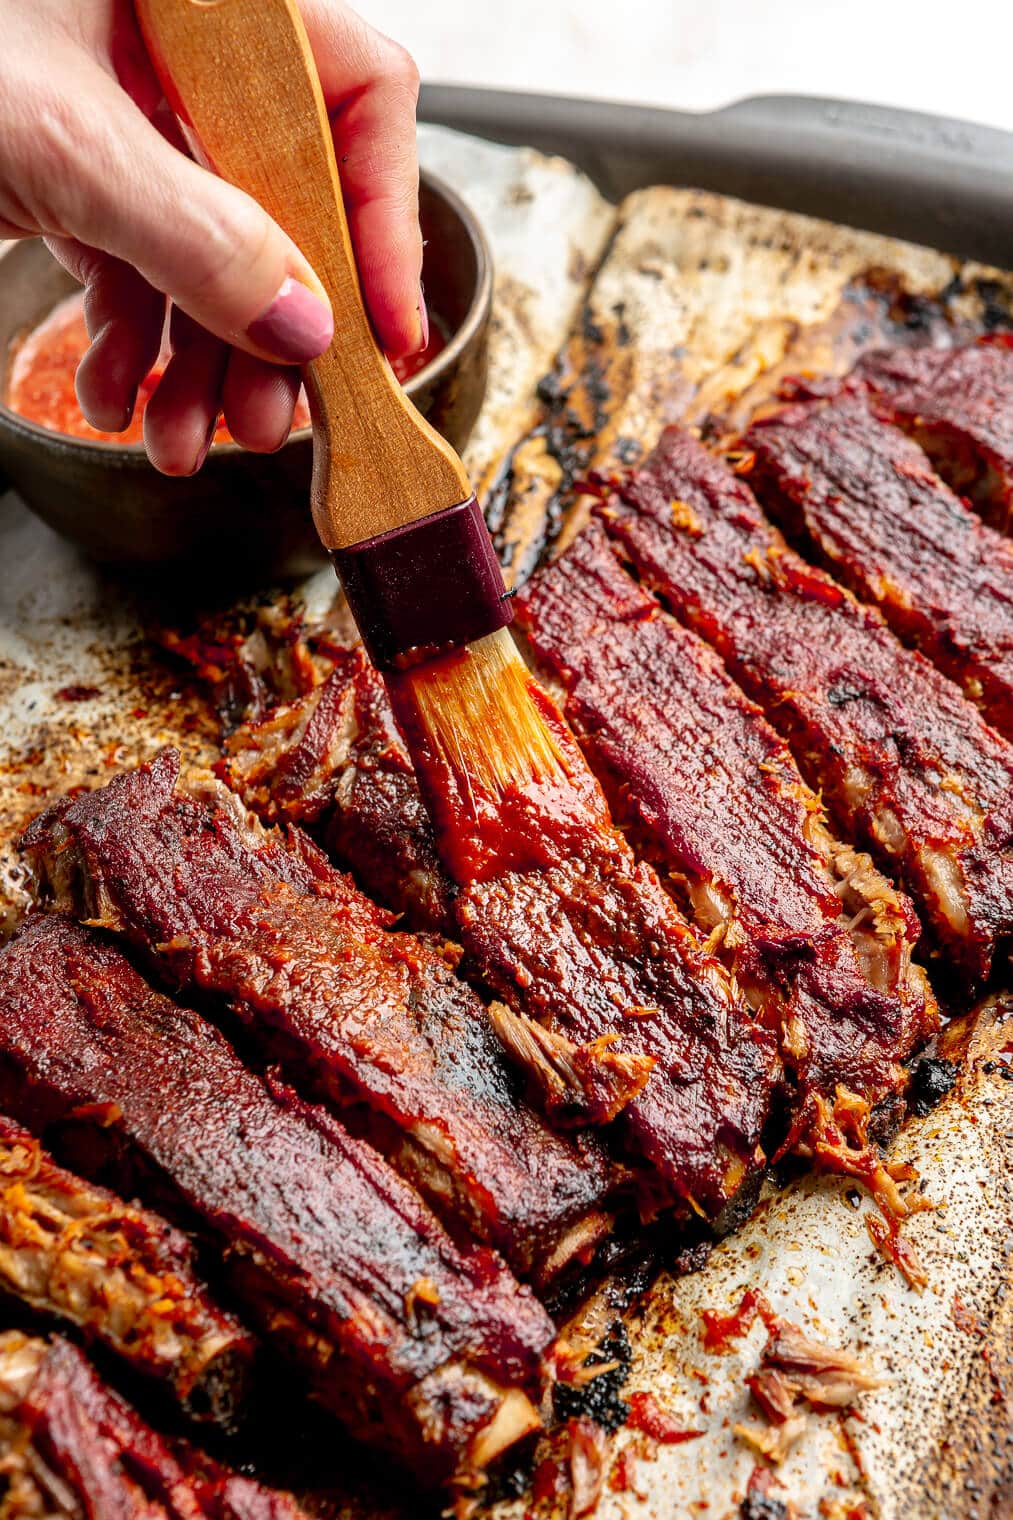 Cooked pork spare ribs being rubbed with BBQ sauce.